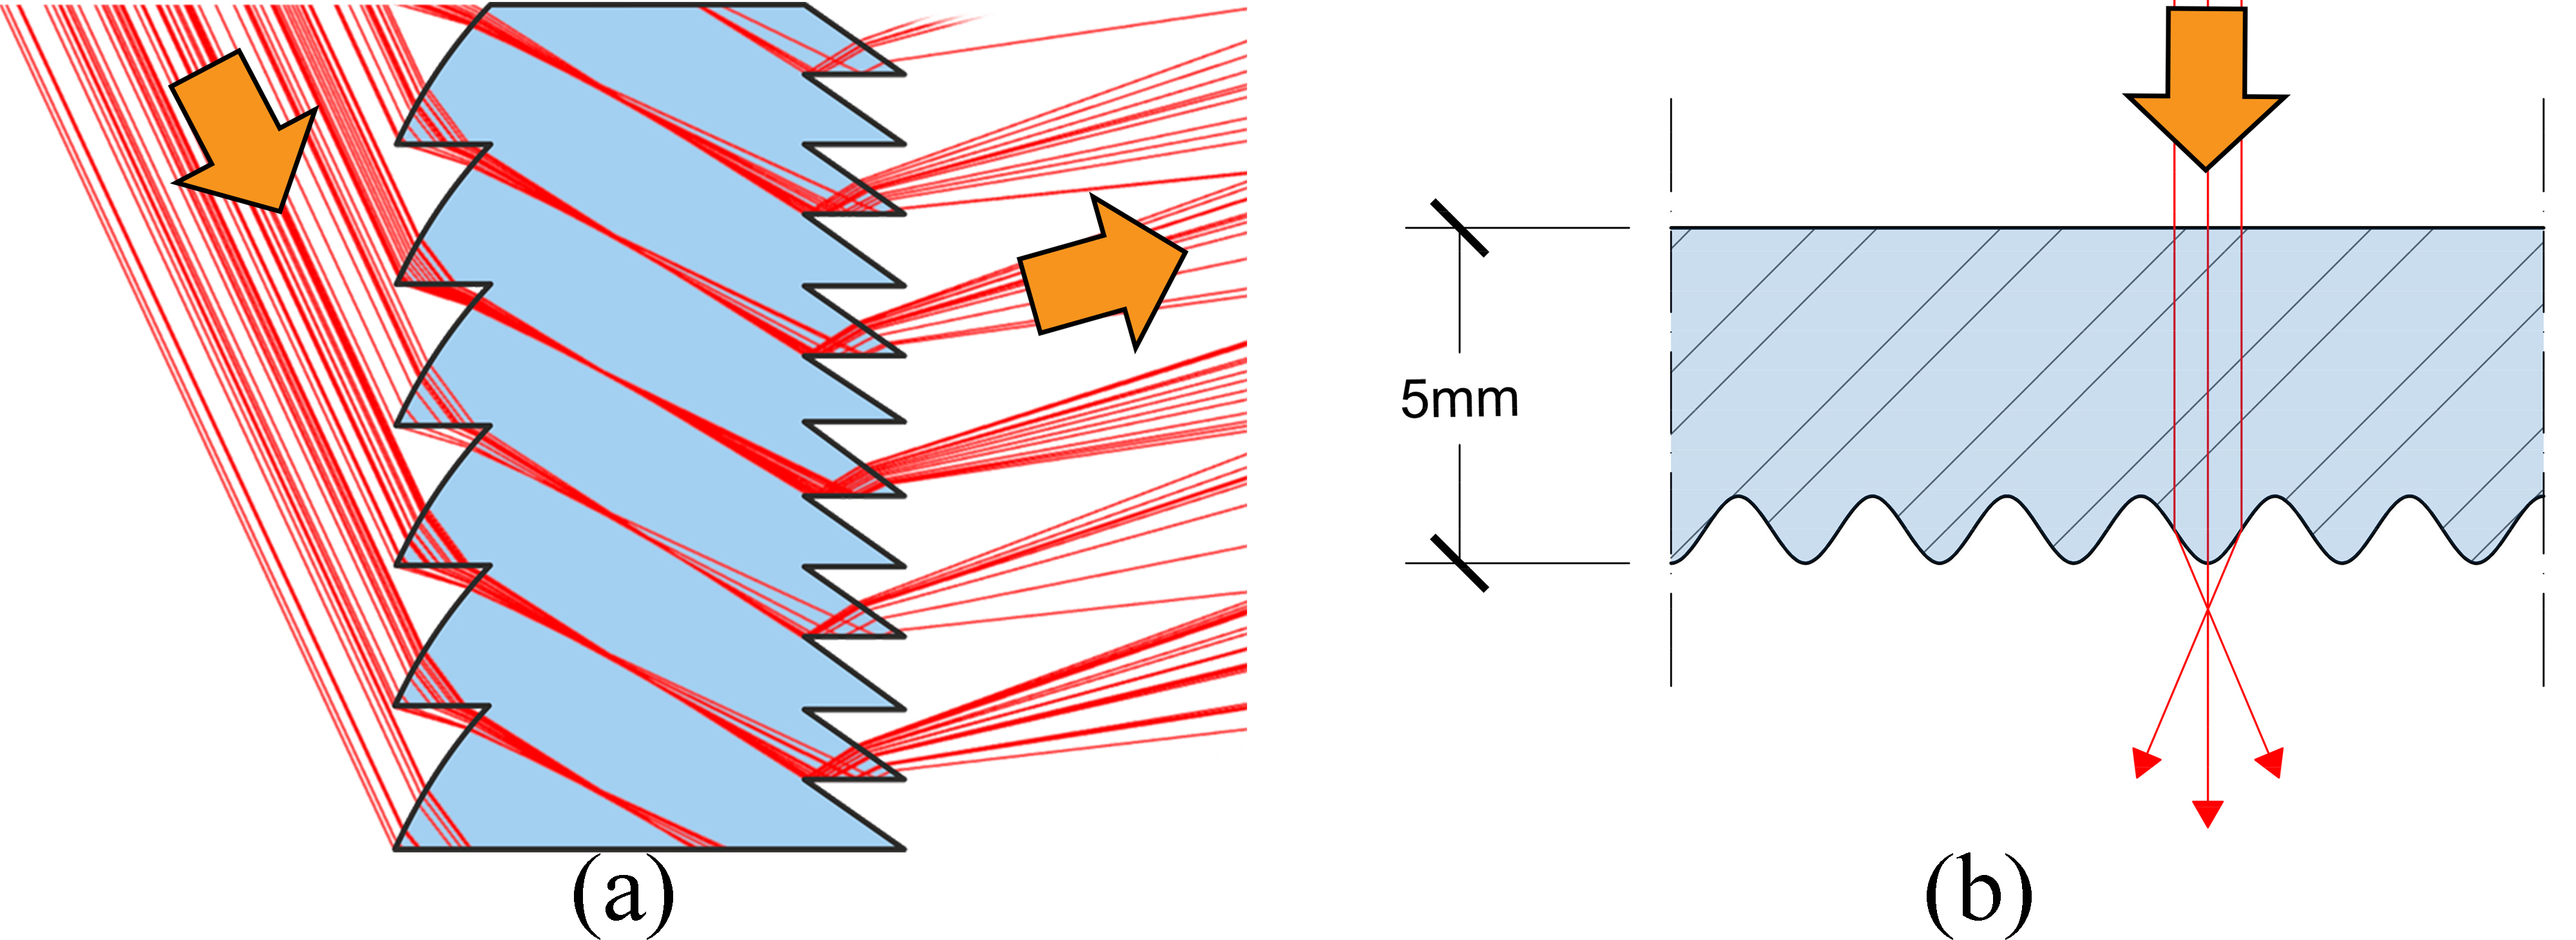 (a) Vertical section with function principle of vertical sunlight redirecting pane with micro-structures on both surfaces [12]. (b) Horizontal section with horizontal spreading of light by sinusoidal structure of glass pane (surface 6).